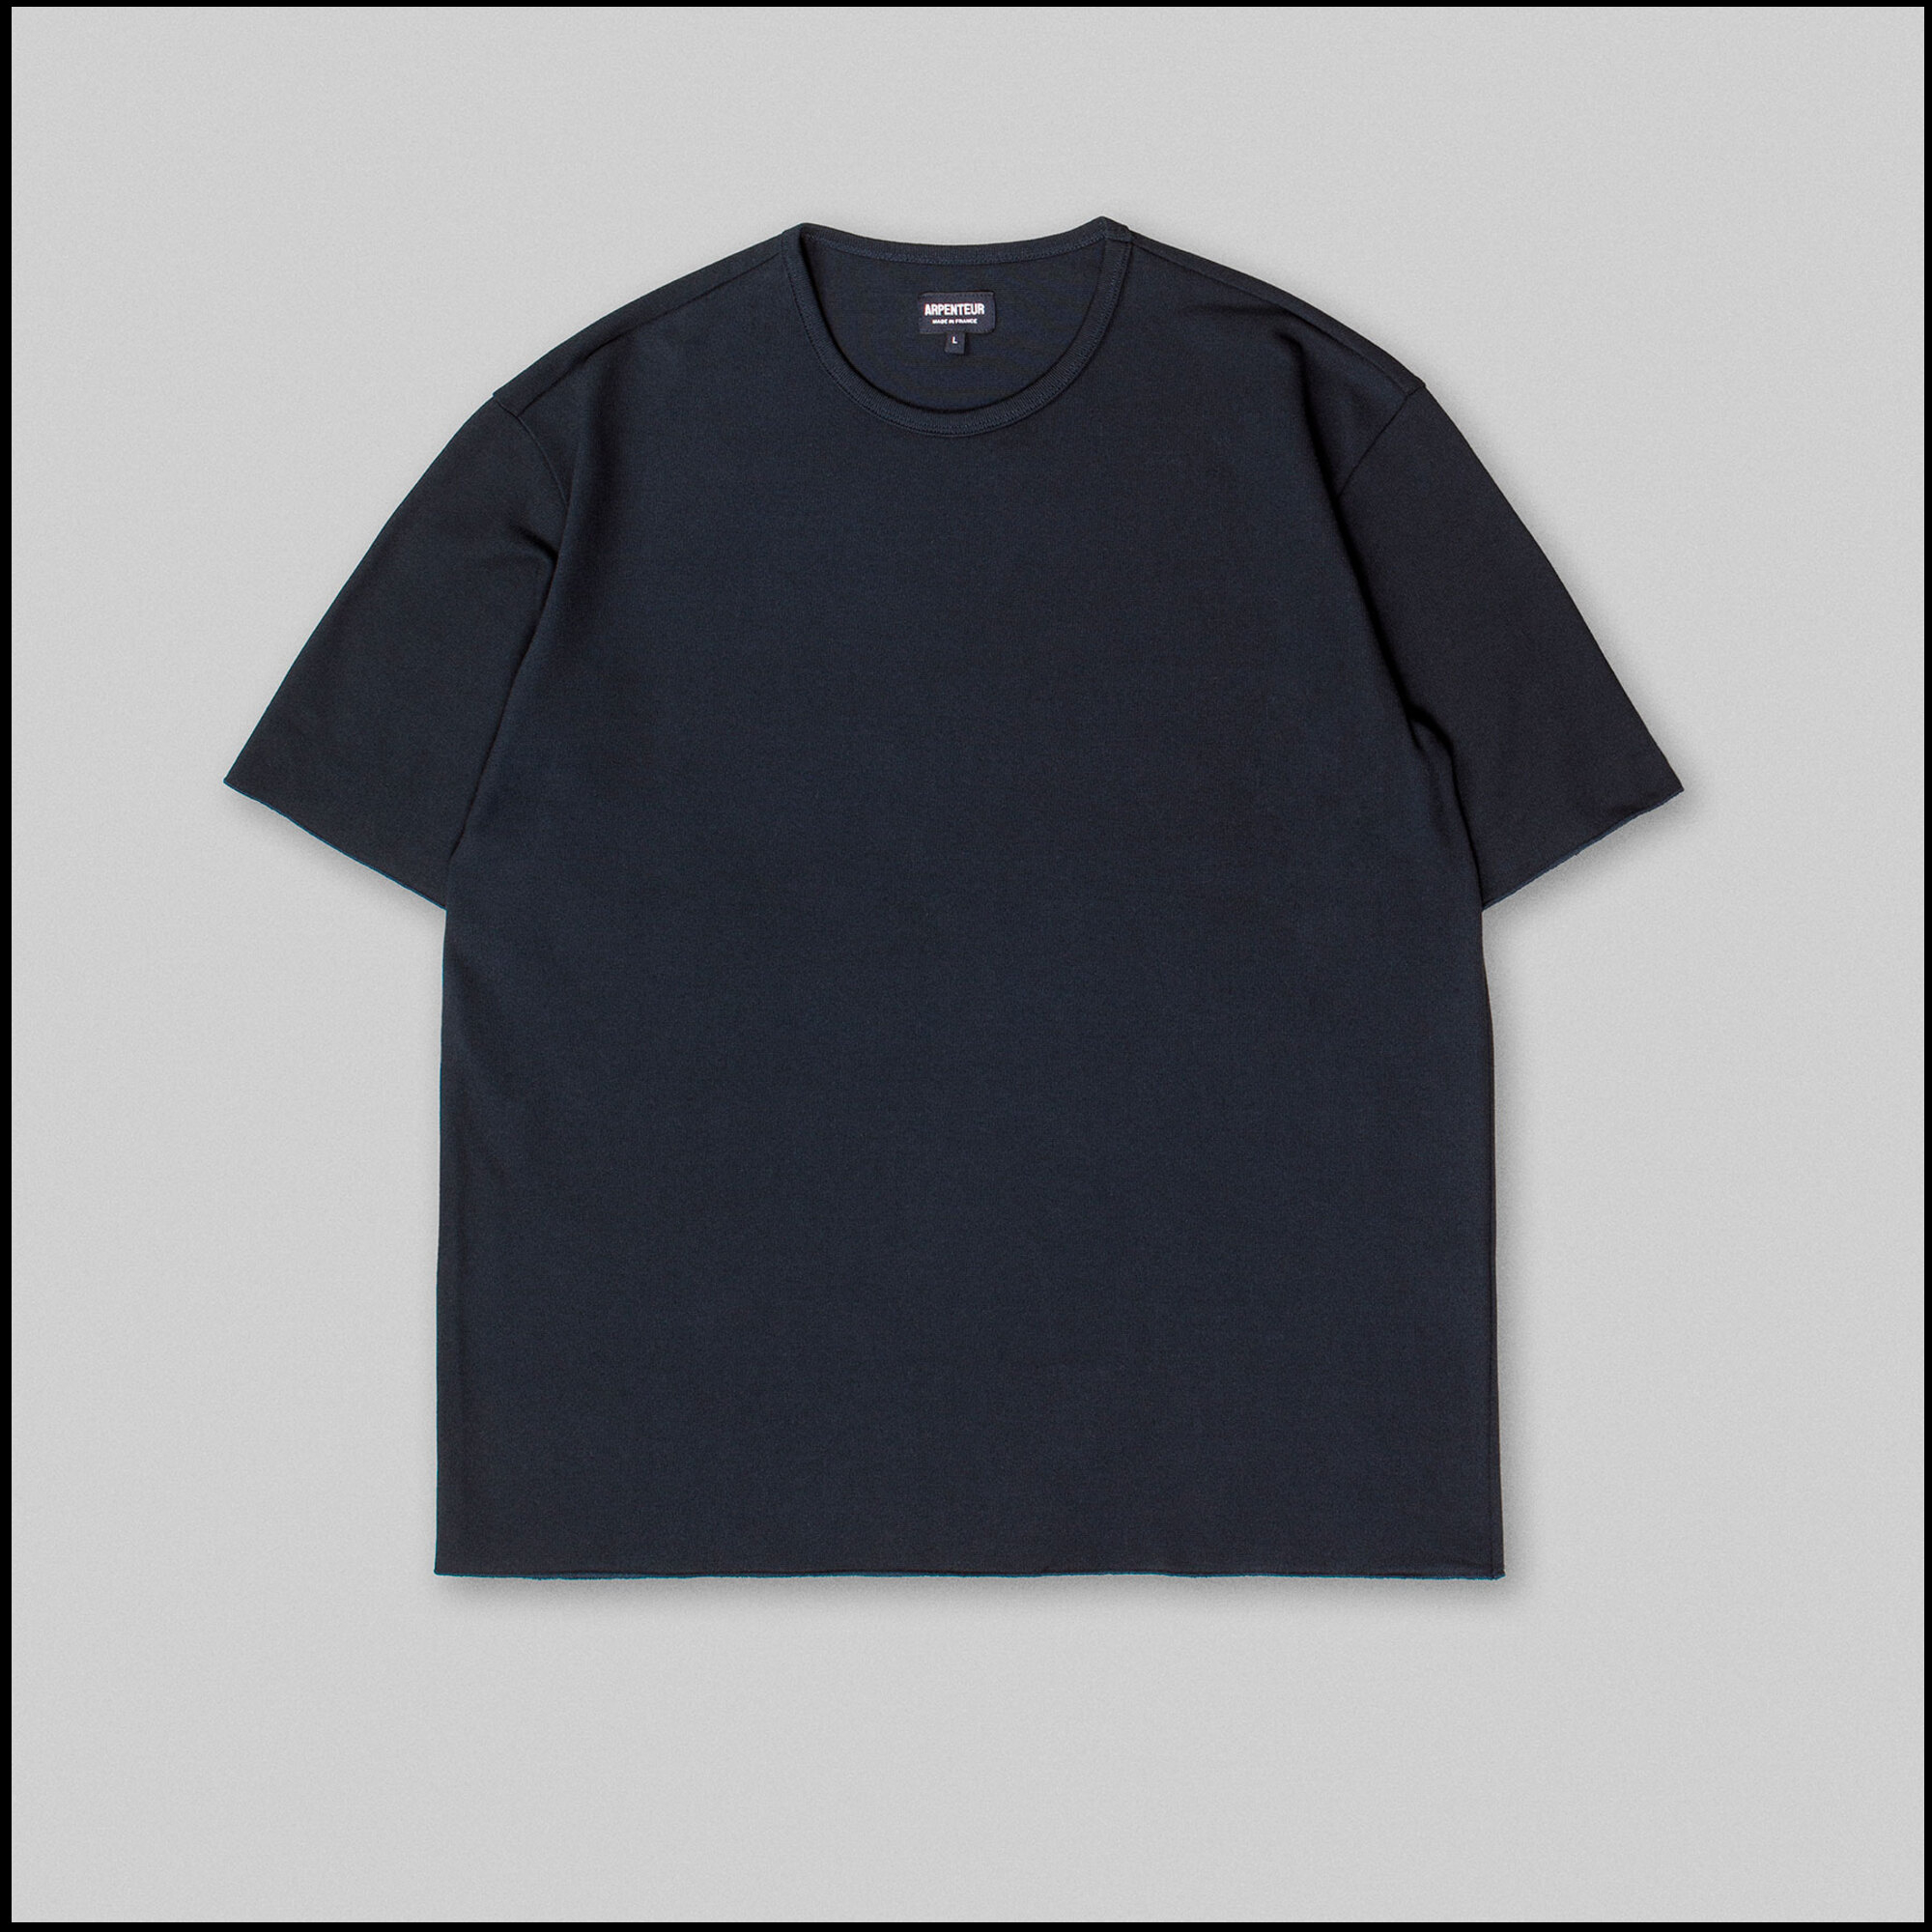 PONTUS t-shirt by Arpenteur in Midnight color